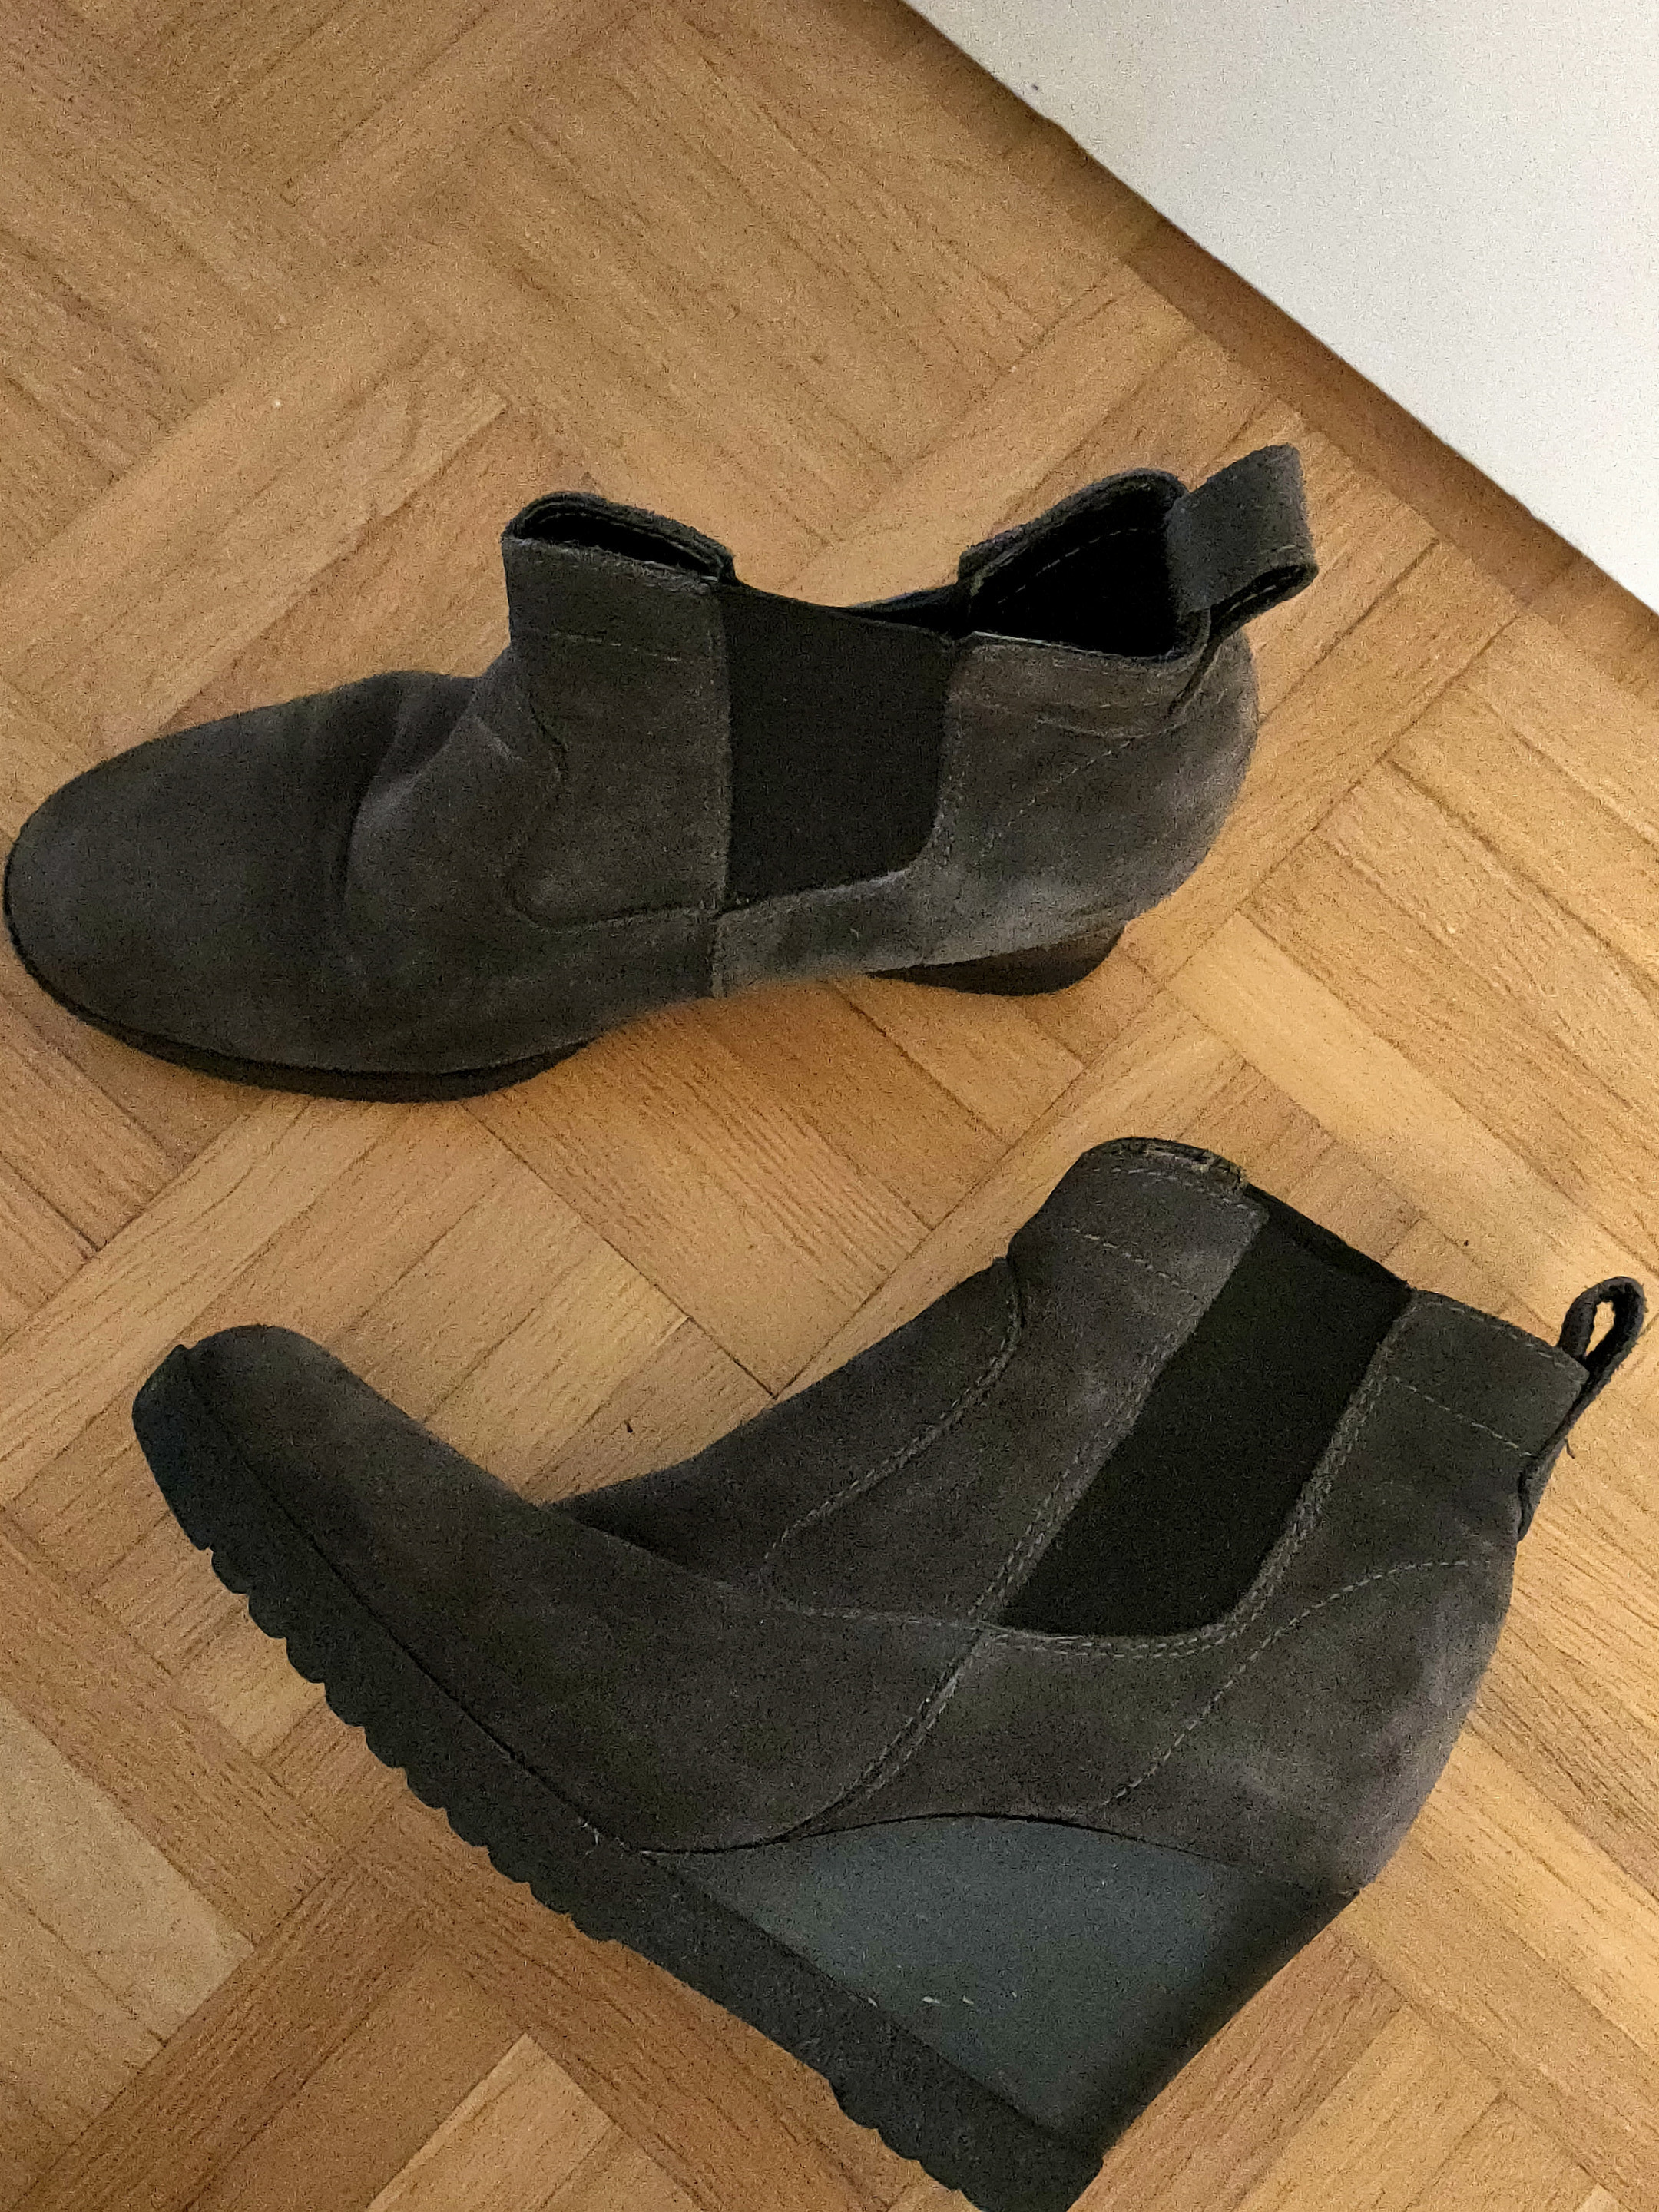 Promod dark grey and black suede ankle boots